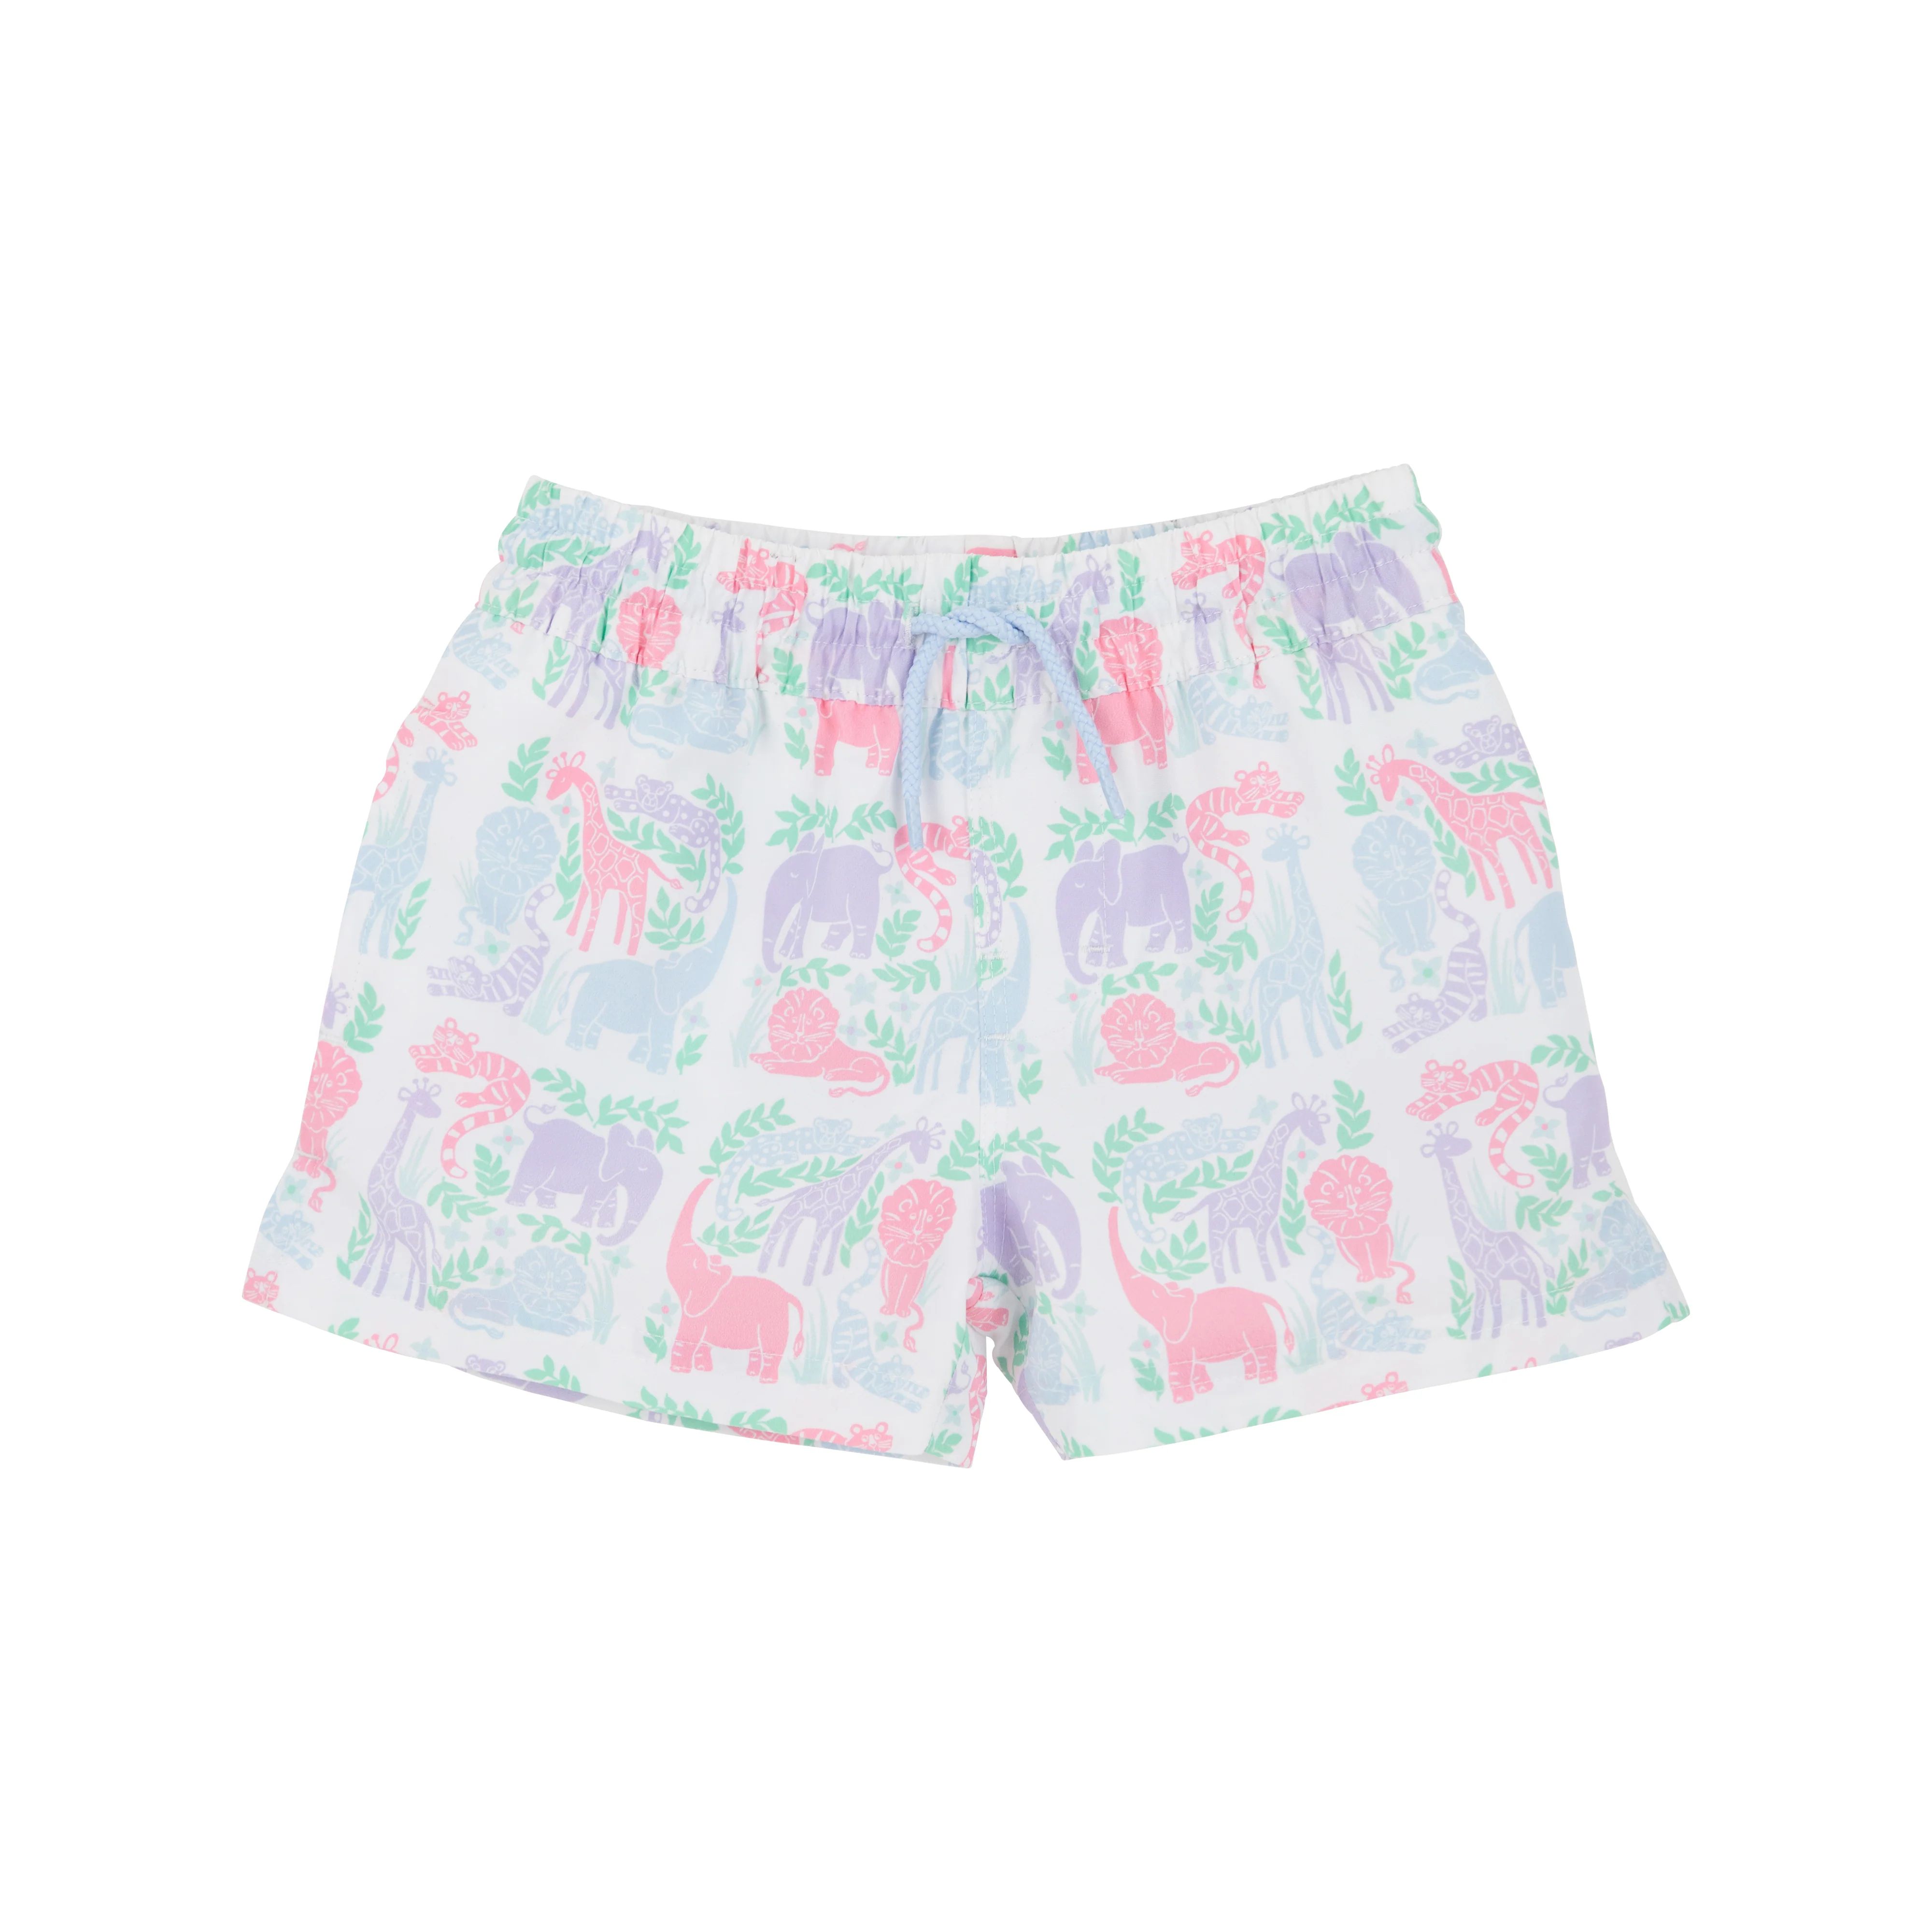 Tortola Trunks - Two By Two Hurrah Hurrah with Beale Street Blue Stork | The Beaufort Bonnet Company